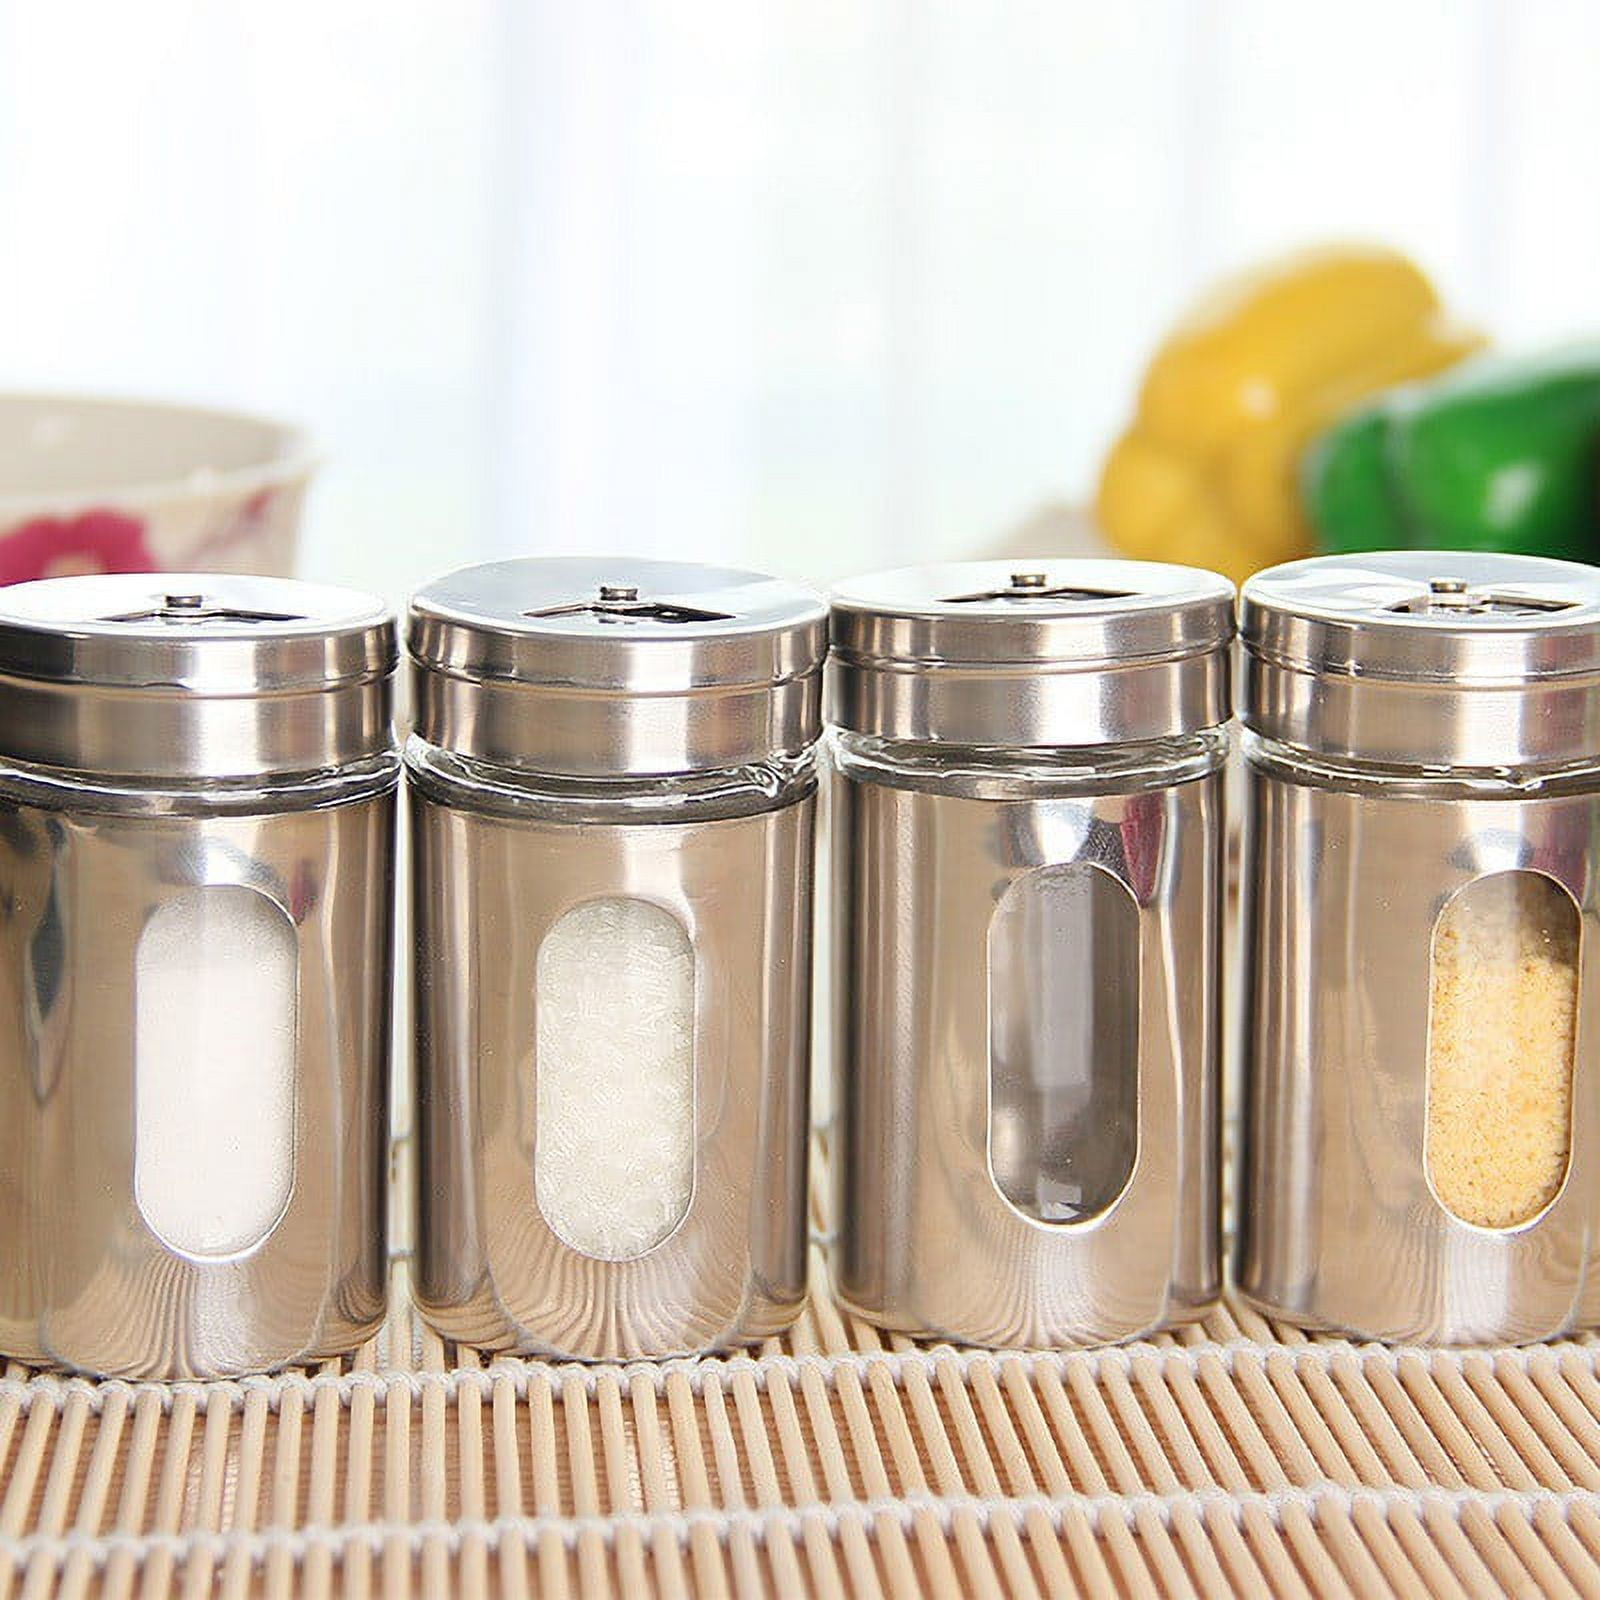 Segarty Spice Jars, 6 Pack 3 oz Spice Bottles with Shaker Lids, Glass Empty  Storage Containers with Adjustable Stainless Steel Flow Top for Your